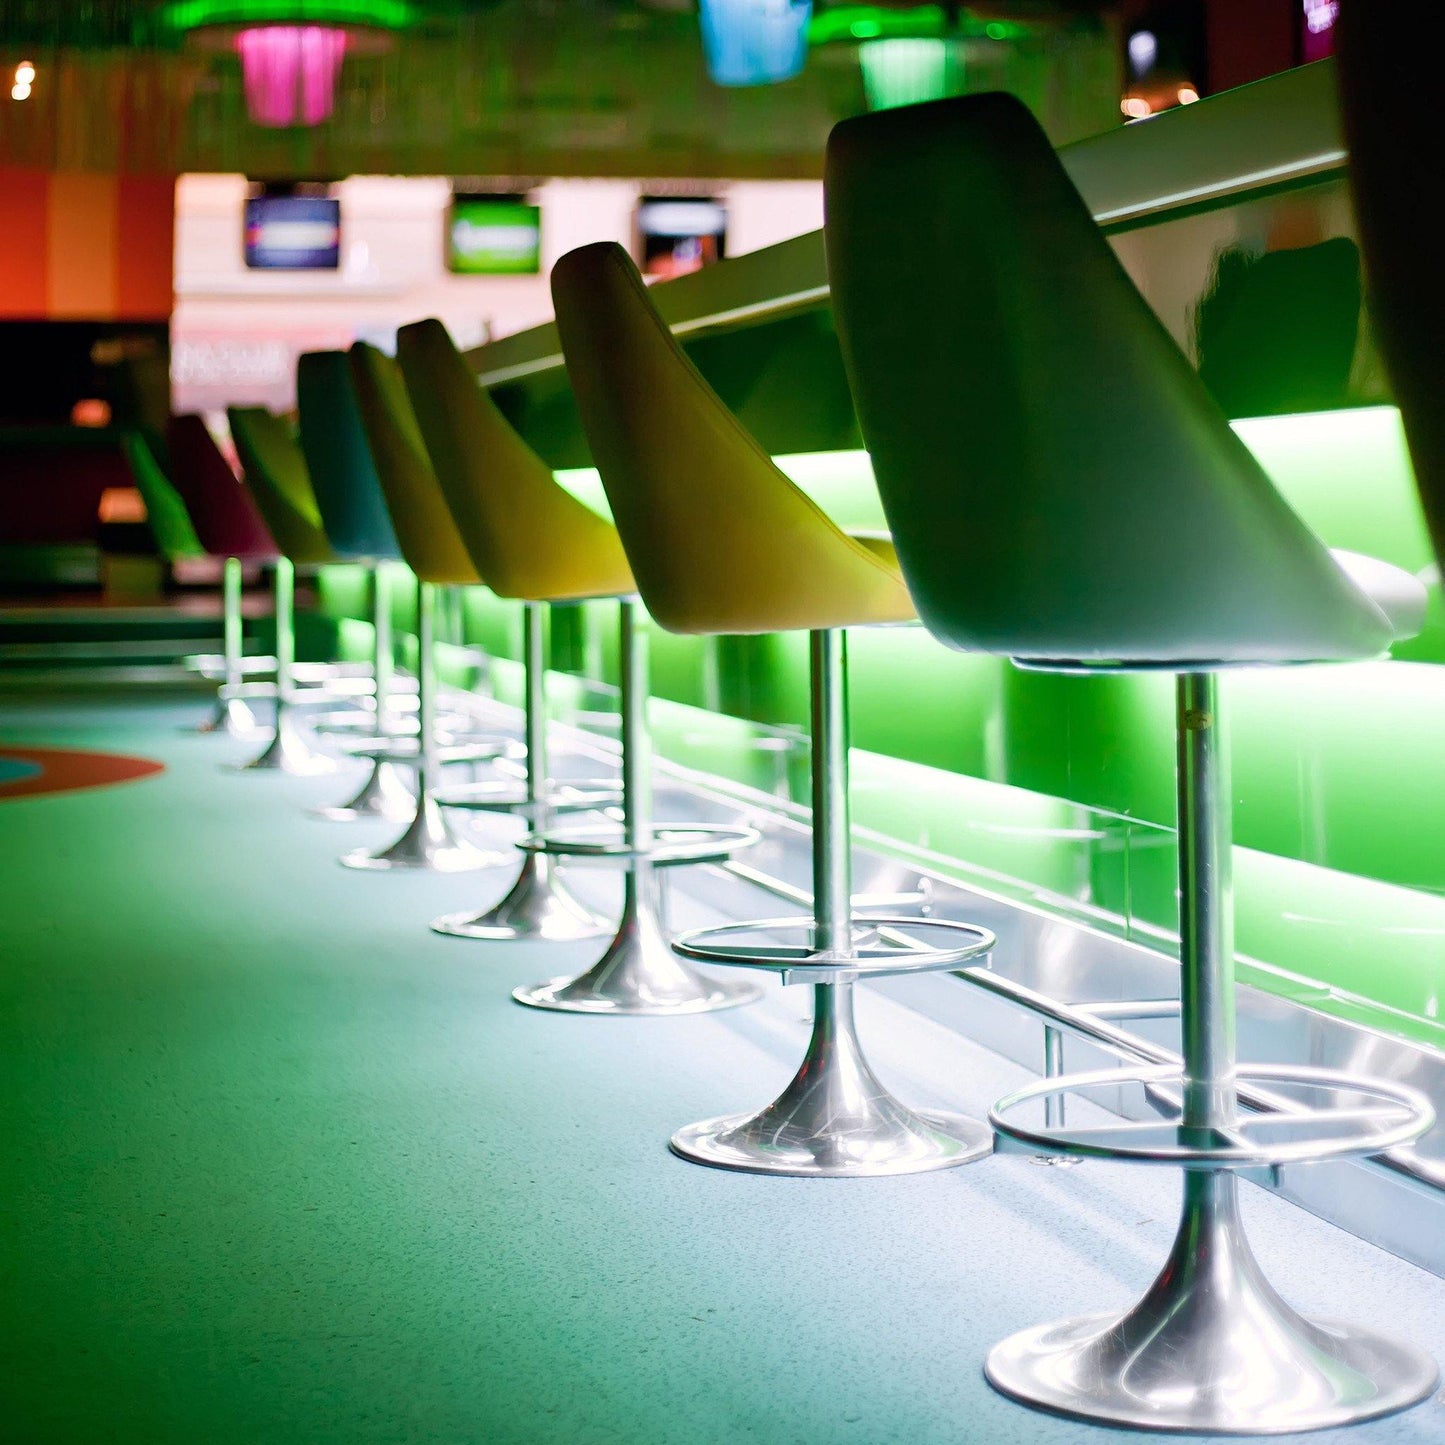 Load image into Gallery viewer, green hued bar with modern stool chairs illuminated by green strip light from under bar counter
